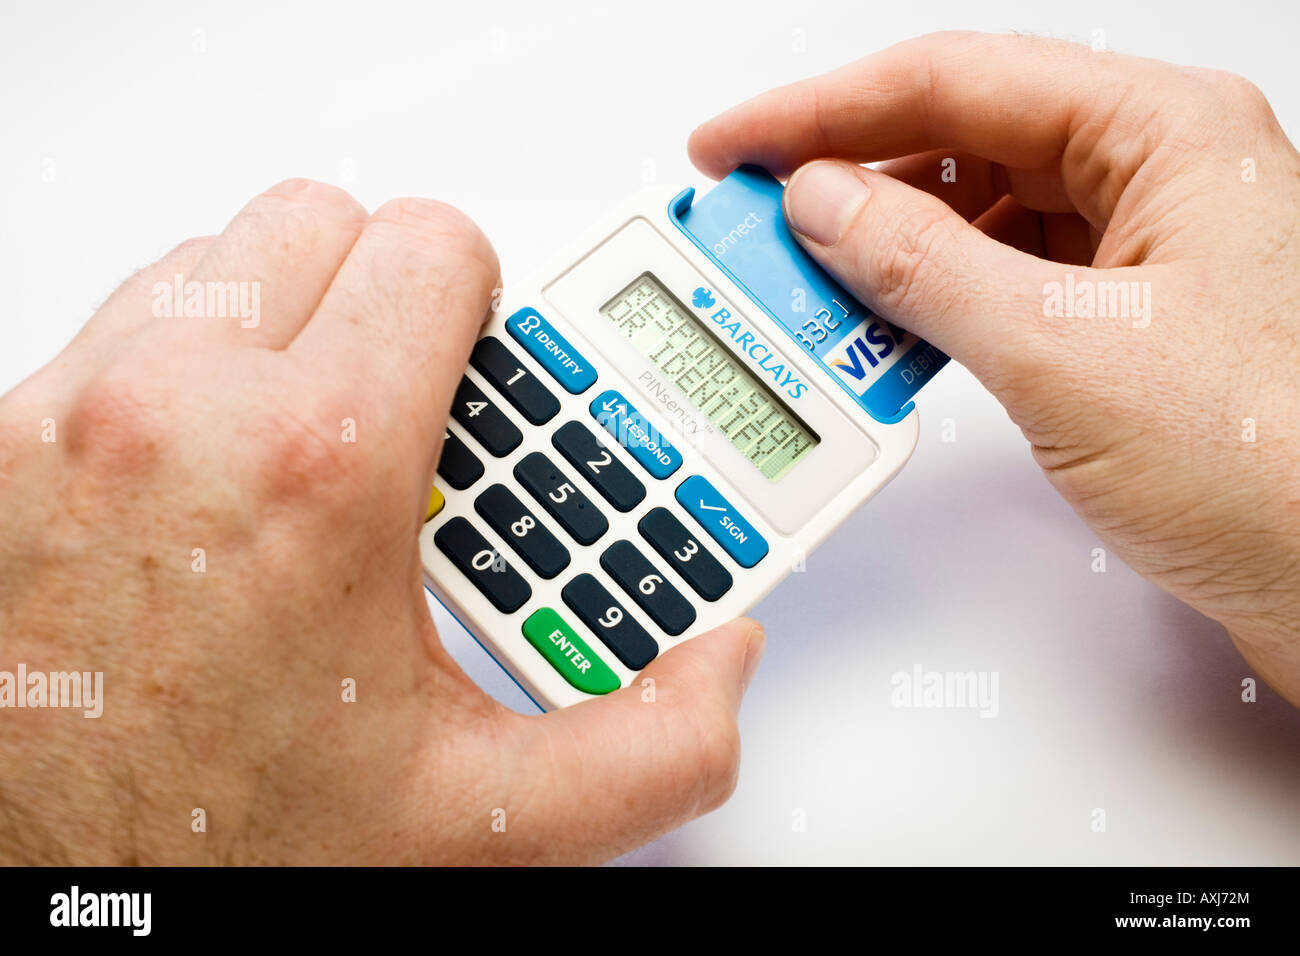 Inserting a debit card into a Barclays Bank Pin Sentry debit card reader device preventing online banking fraud Stock Photo